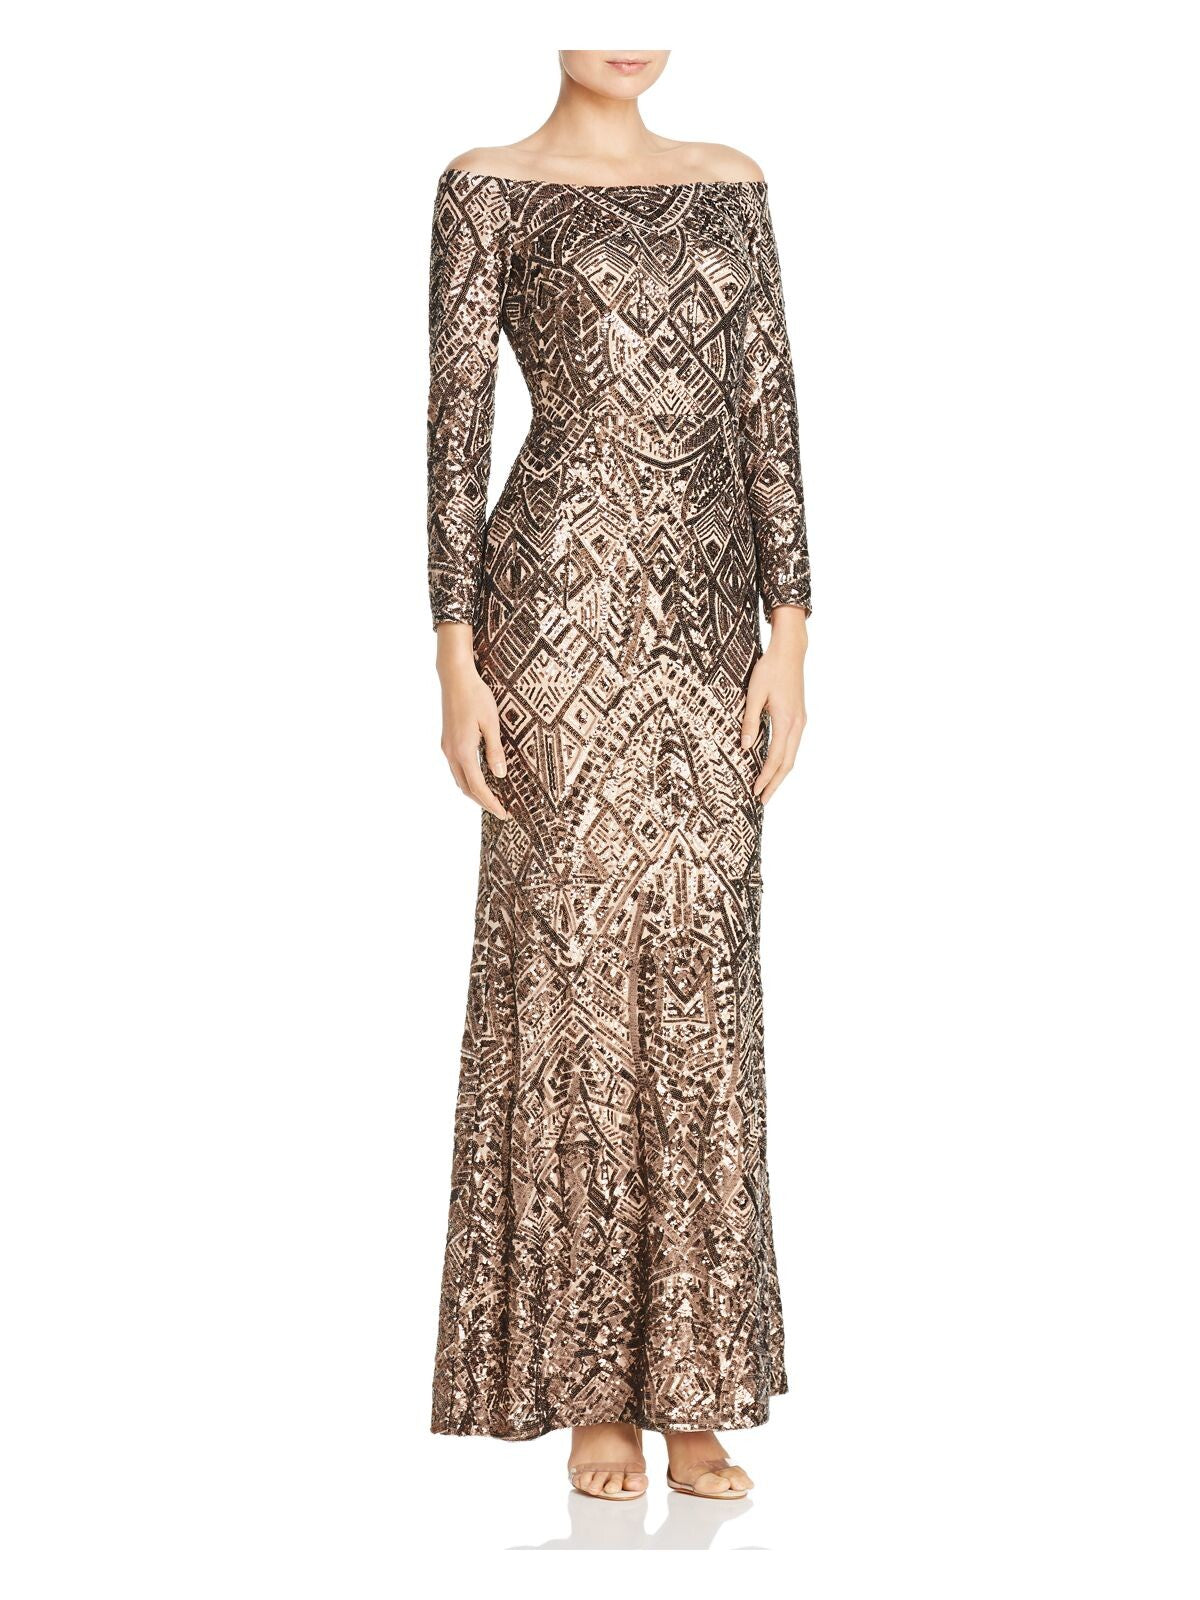 AQUA Womens Brown Sequined Zippered Long Sleeve Off Shoulder Full-Length Formal Body Con Dress 0